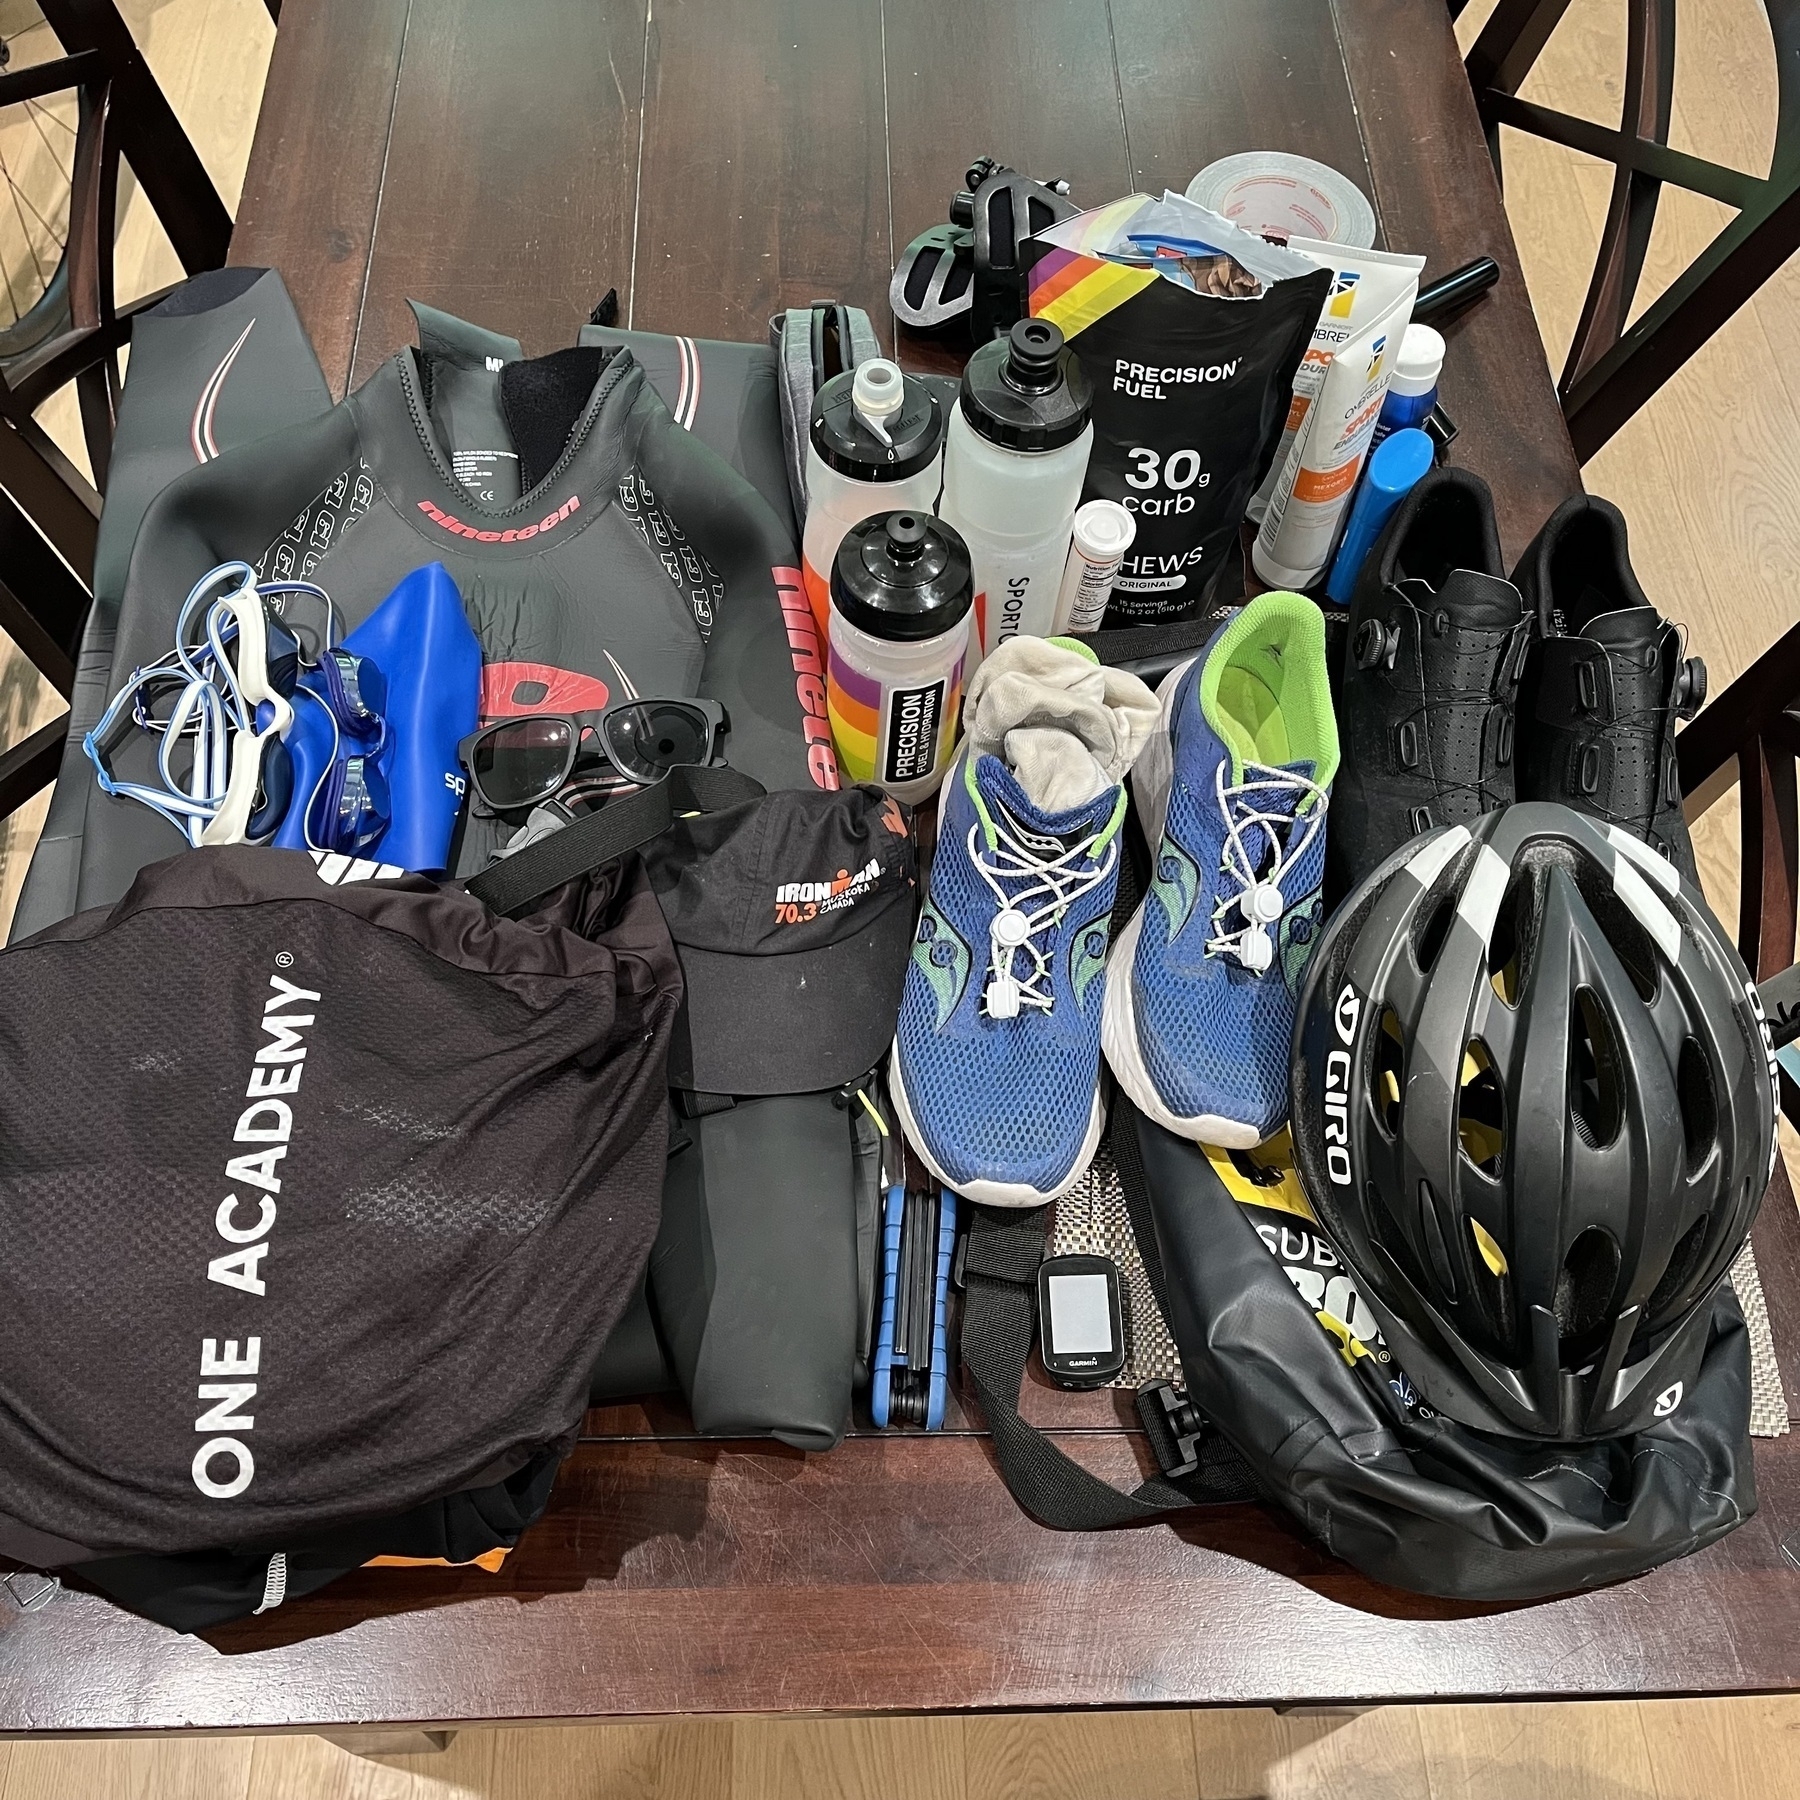 Auto-generated description: A collection of triathlon gear arranged on a table, including a wetsuit, running shoes, helmet, water bottles, nutrition packs, a towel, and cycling shoes.